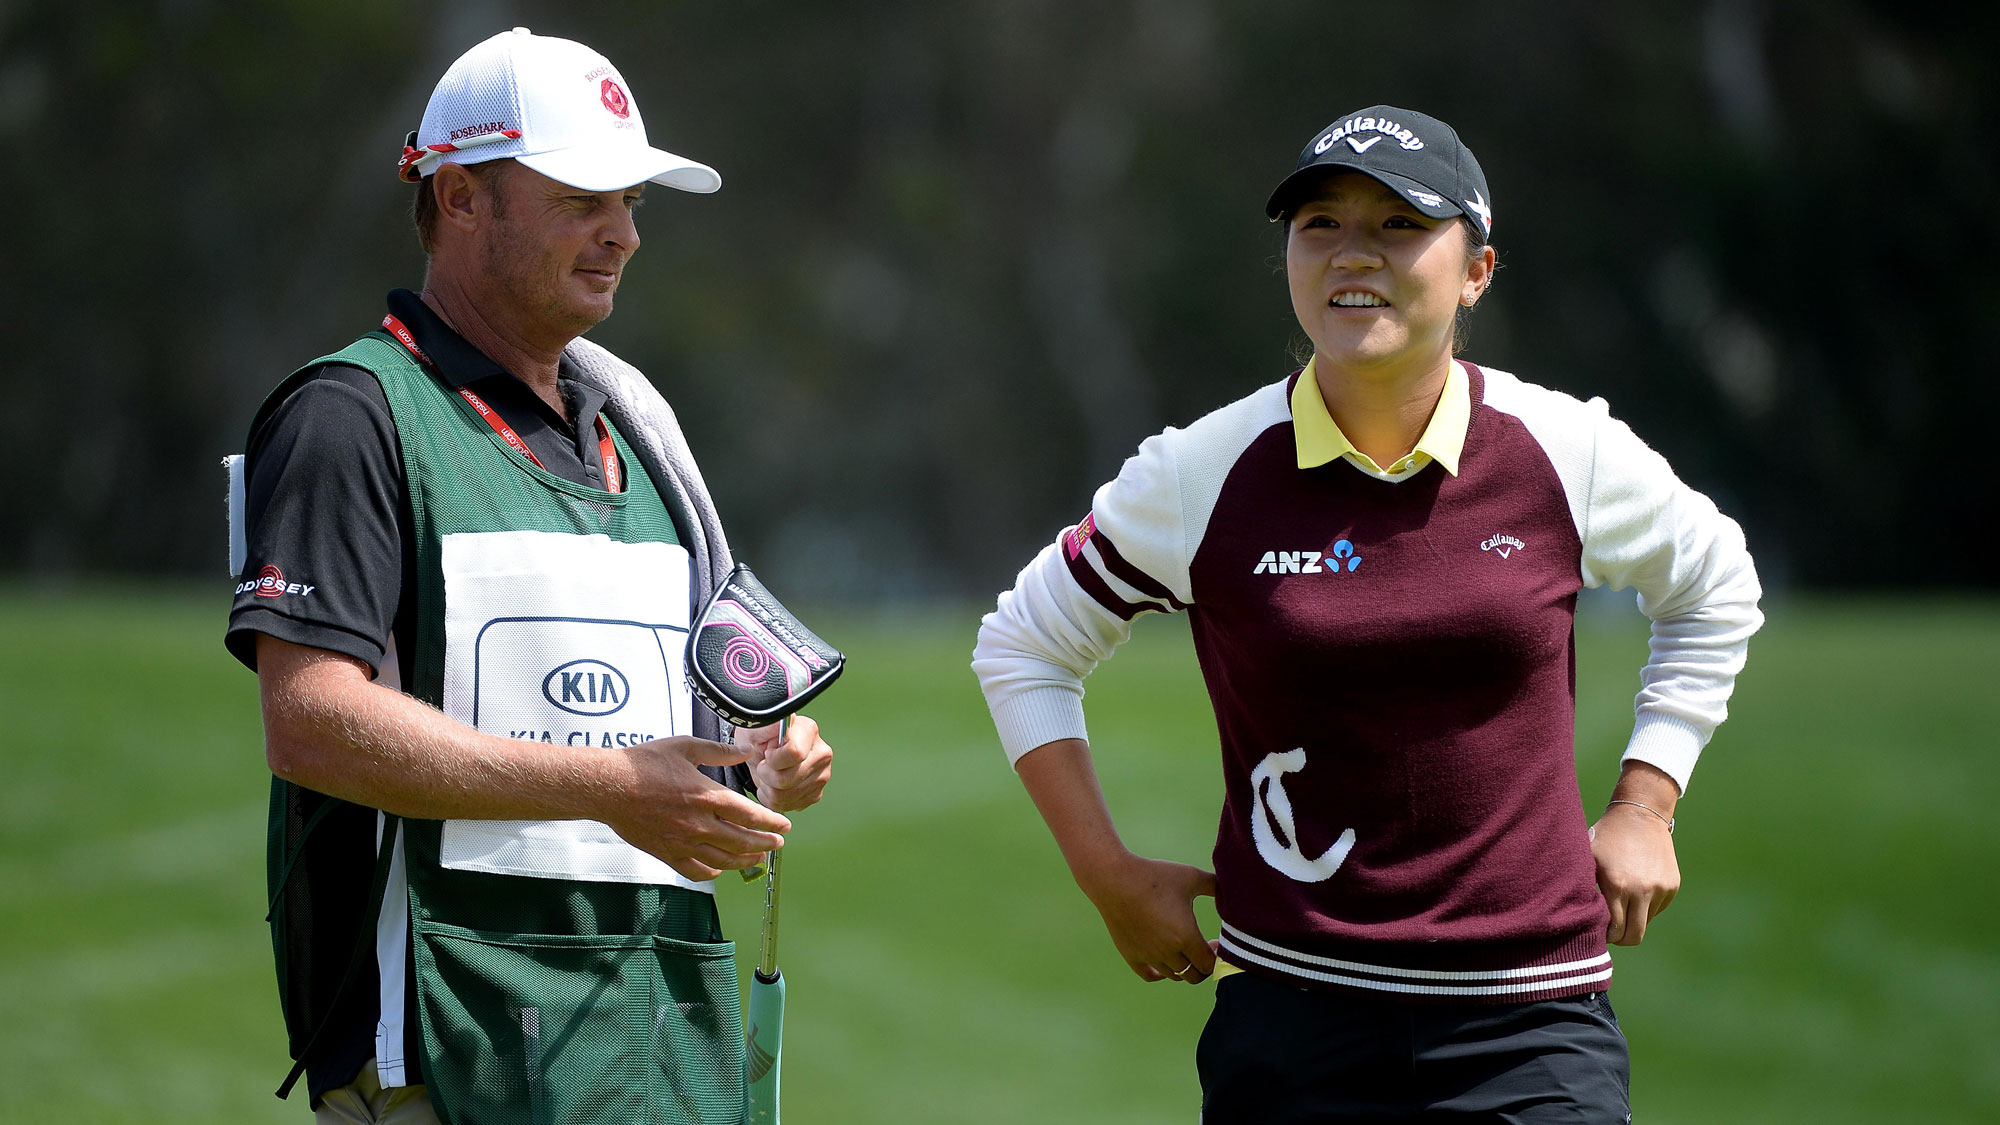  Lydia Ko of New Zealand reacts after her birdie putt on the first hole during the final round of the KIA Classic